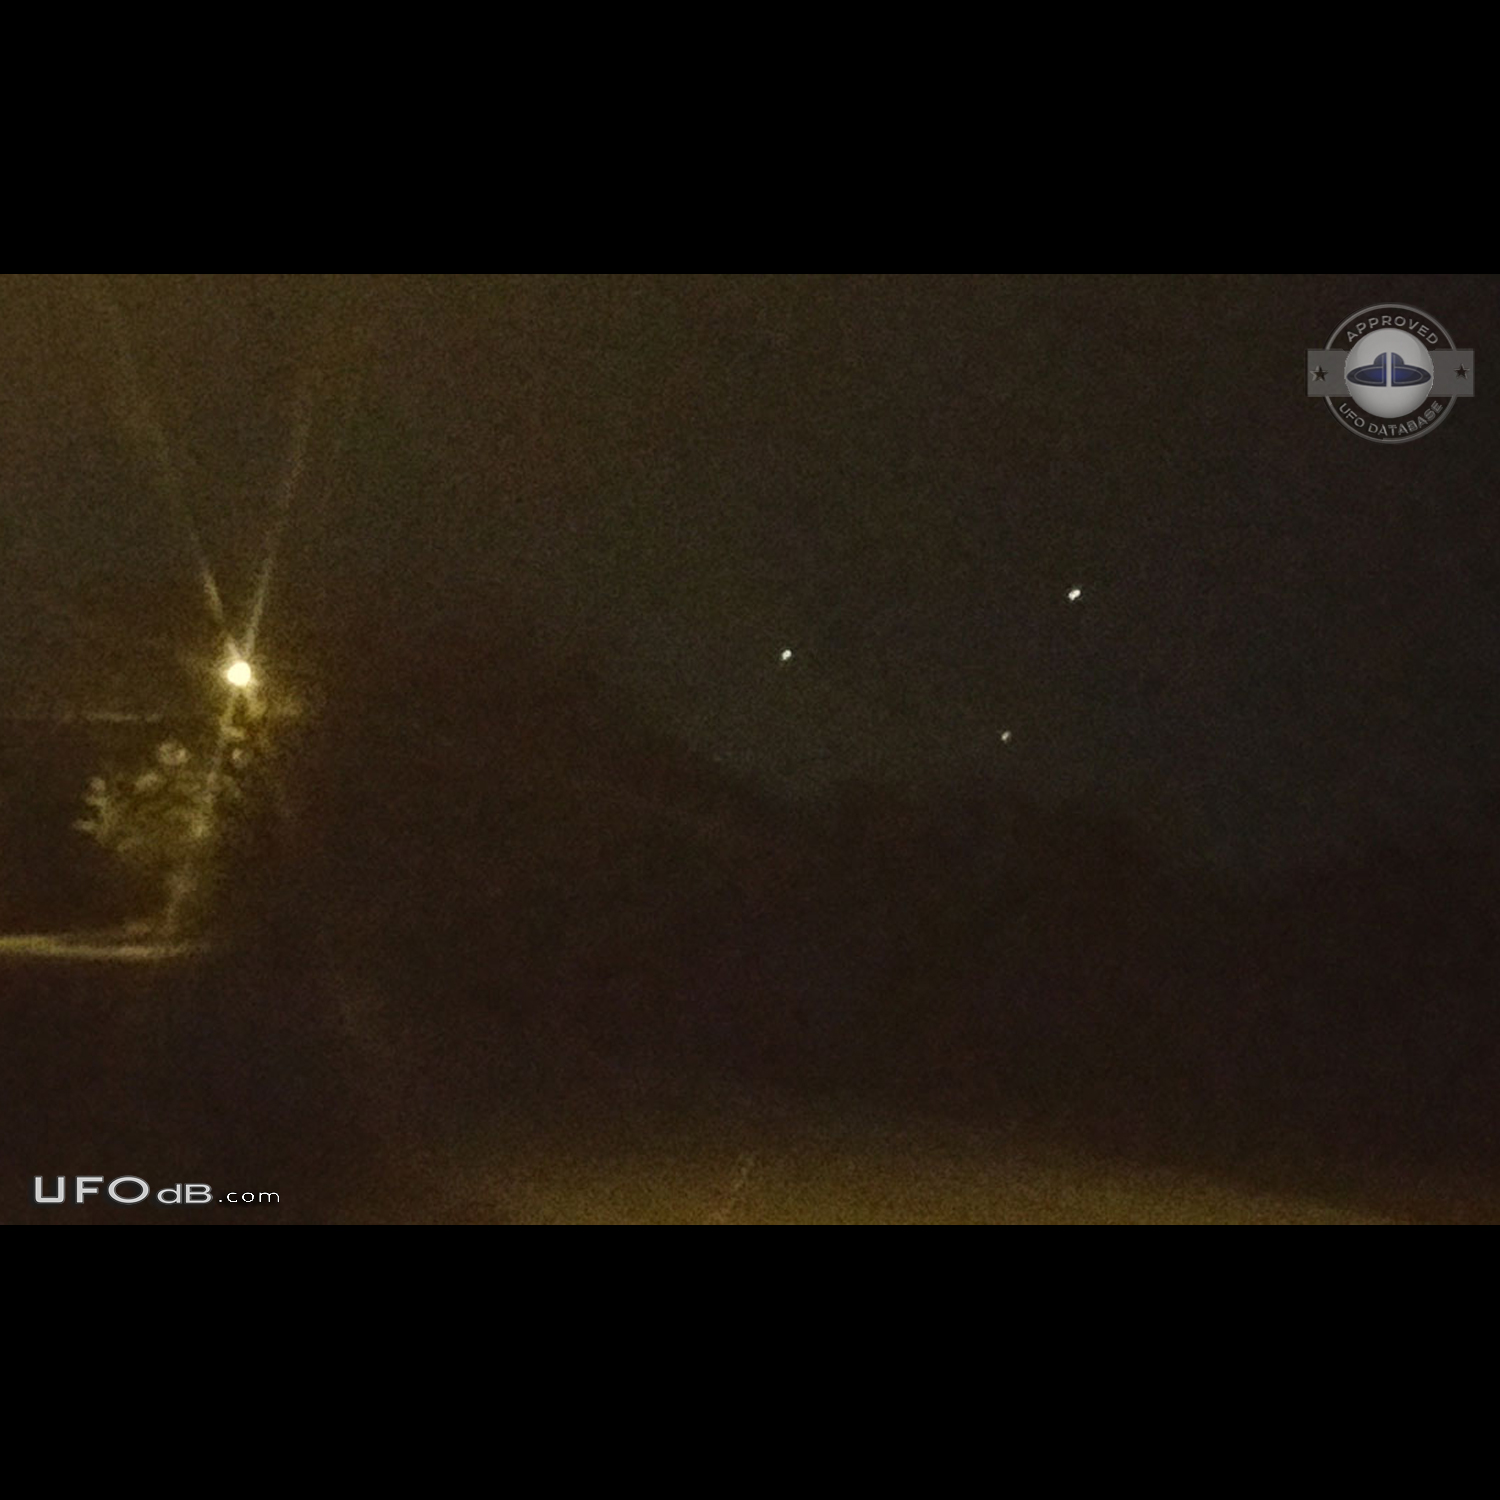 Me and coworker driving and saw the UFOs - Saint Cloud Florida USA 201 UFO Picture #780-5